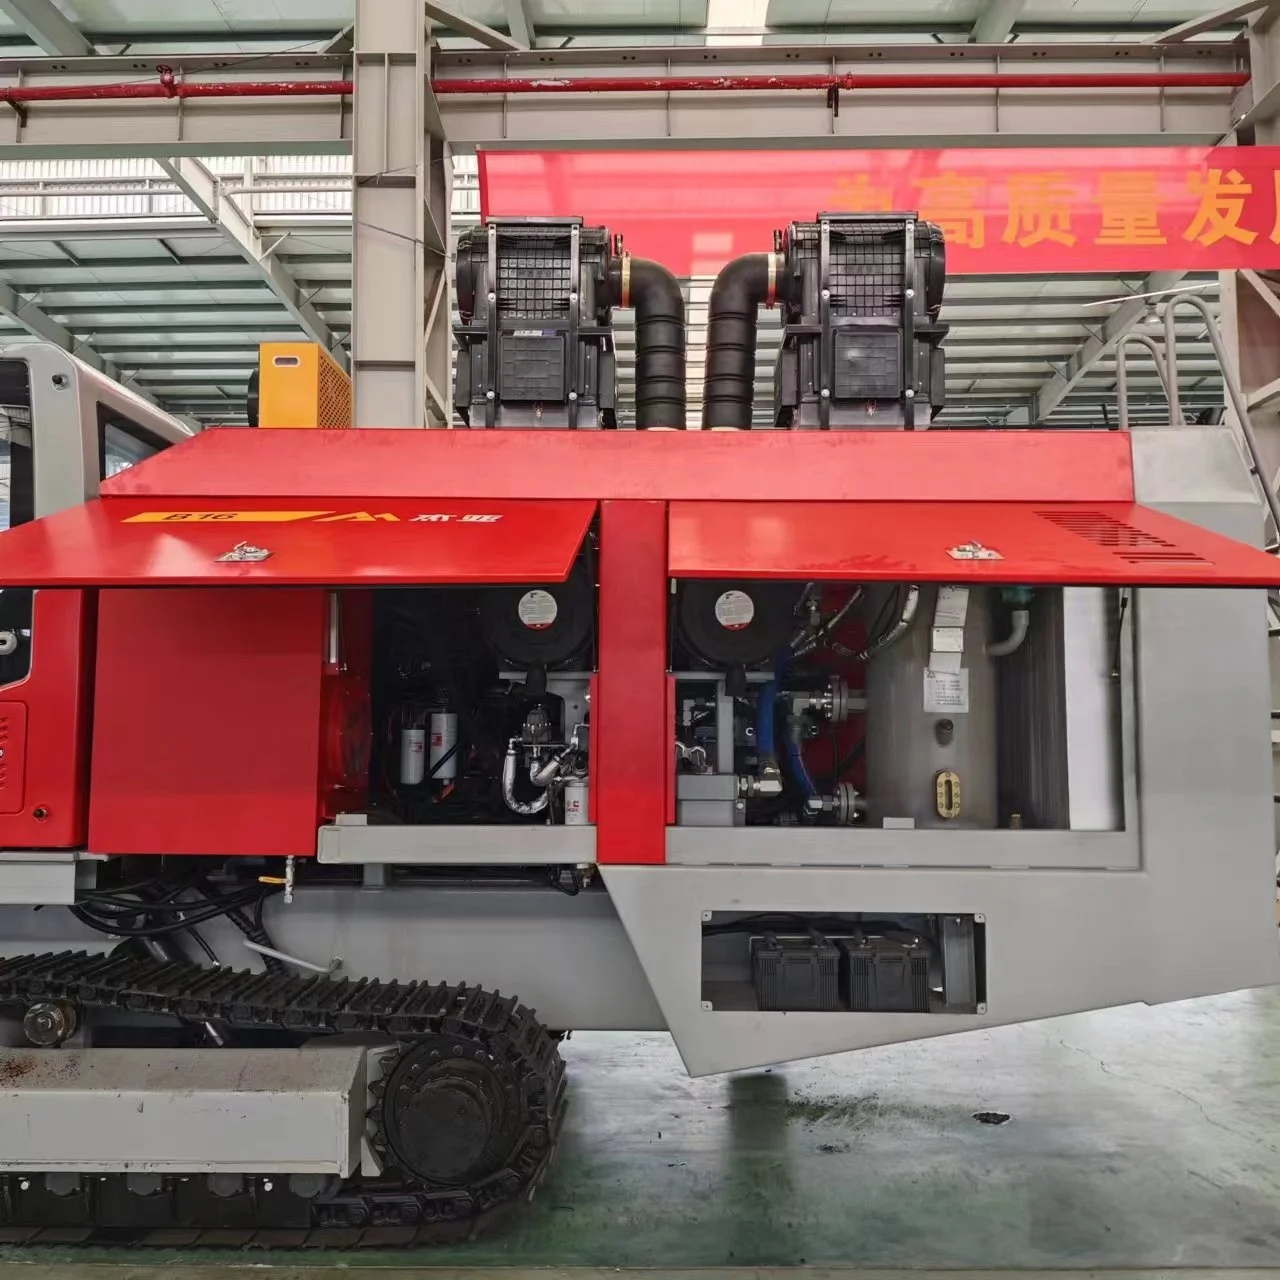 Best quality DTH Surface Drilling rig JIEYA B16 Integrated Anchor Crawler Drilling Rig with Dust collection for Mining